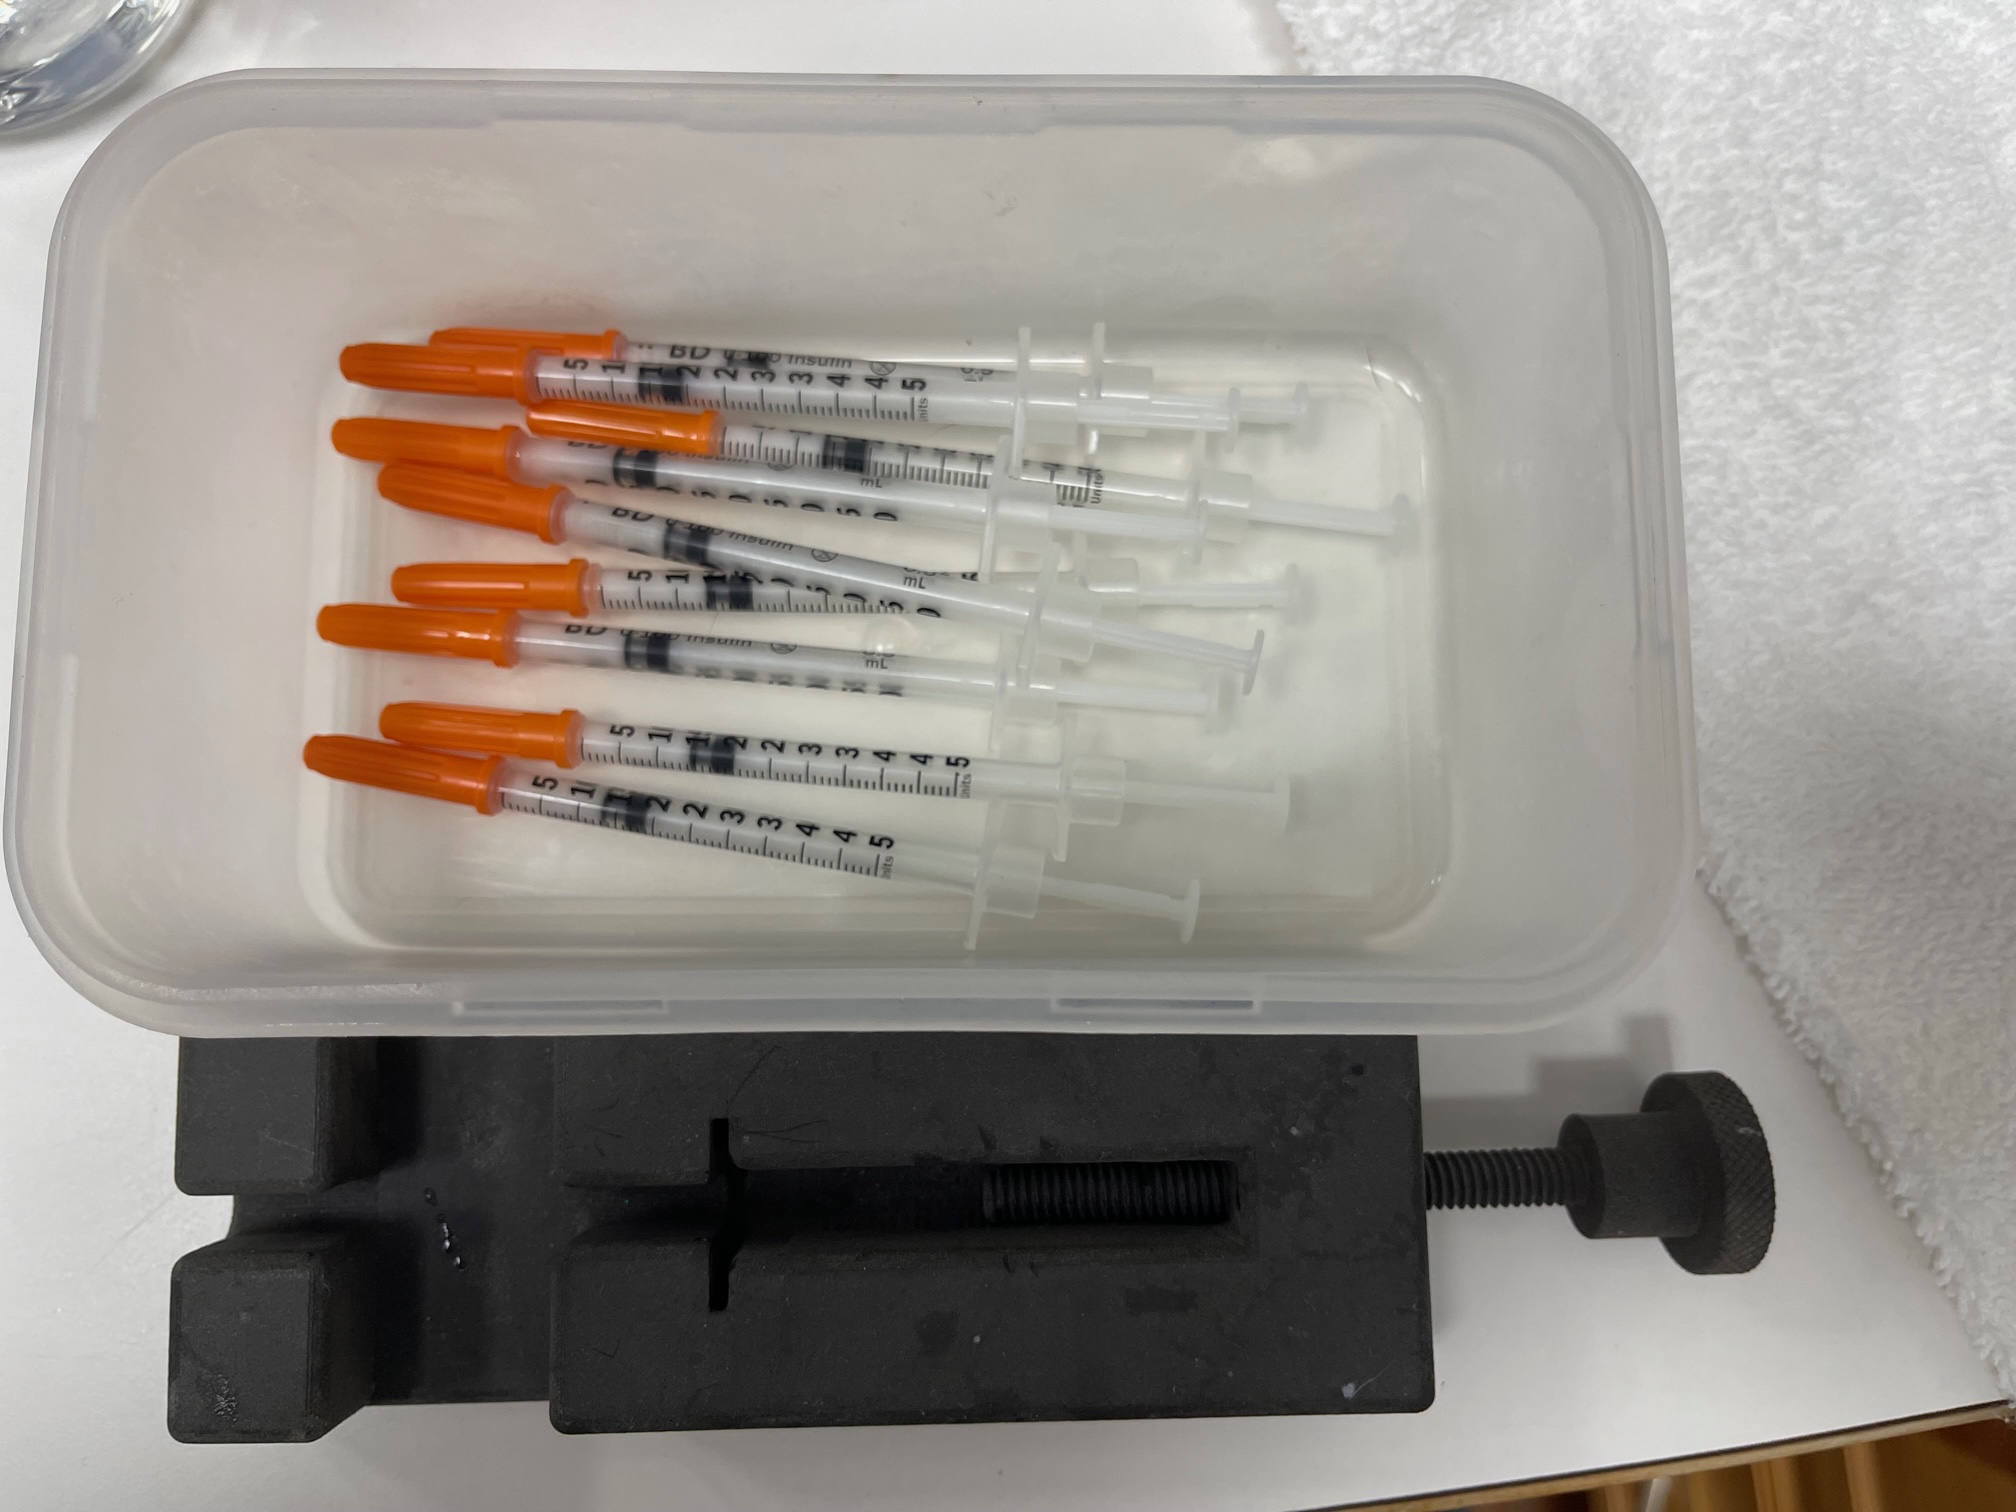 Tool and syringes.jpg